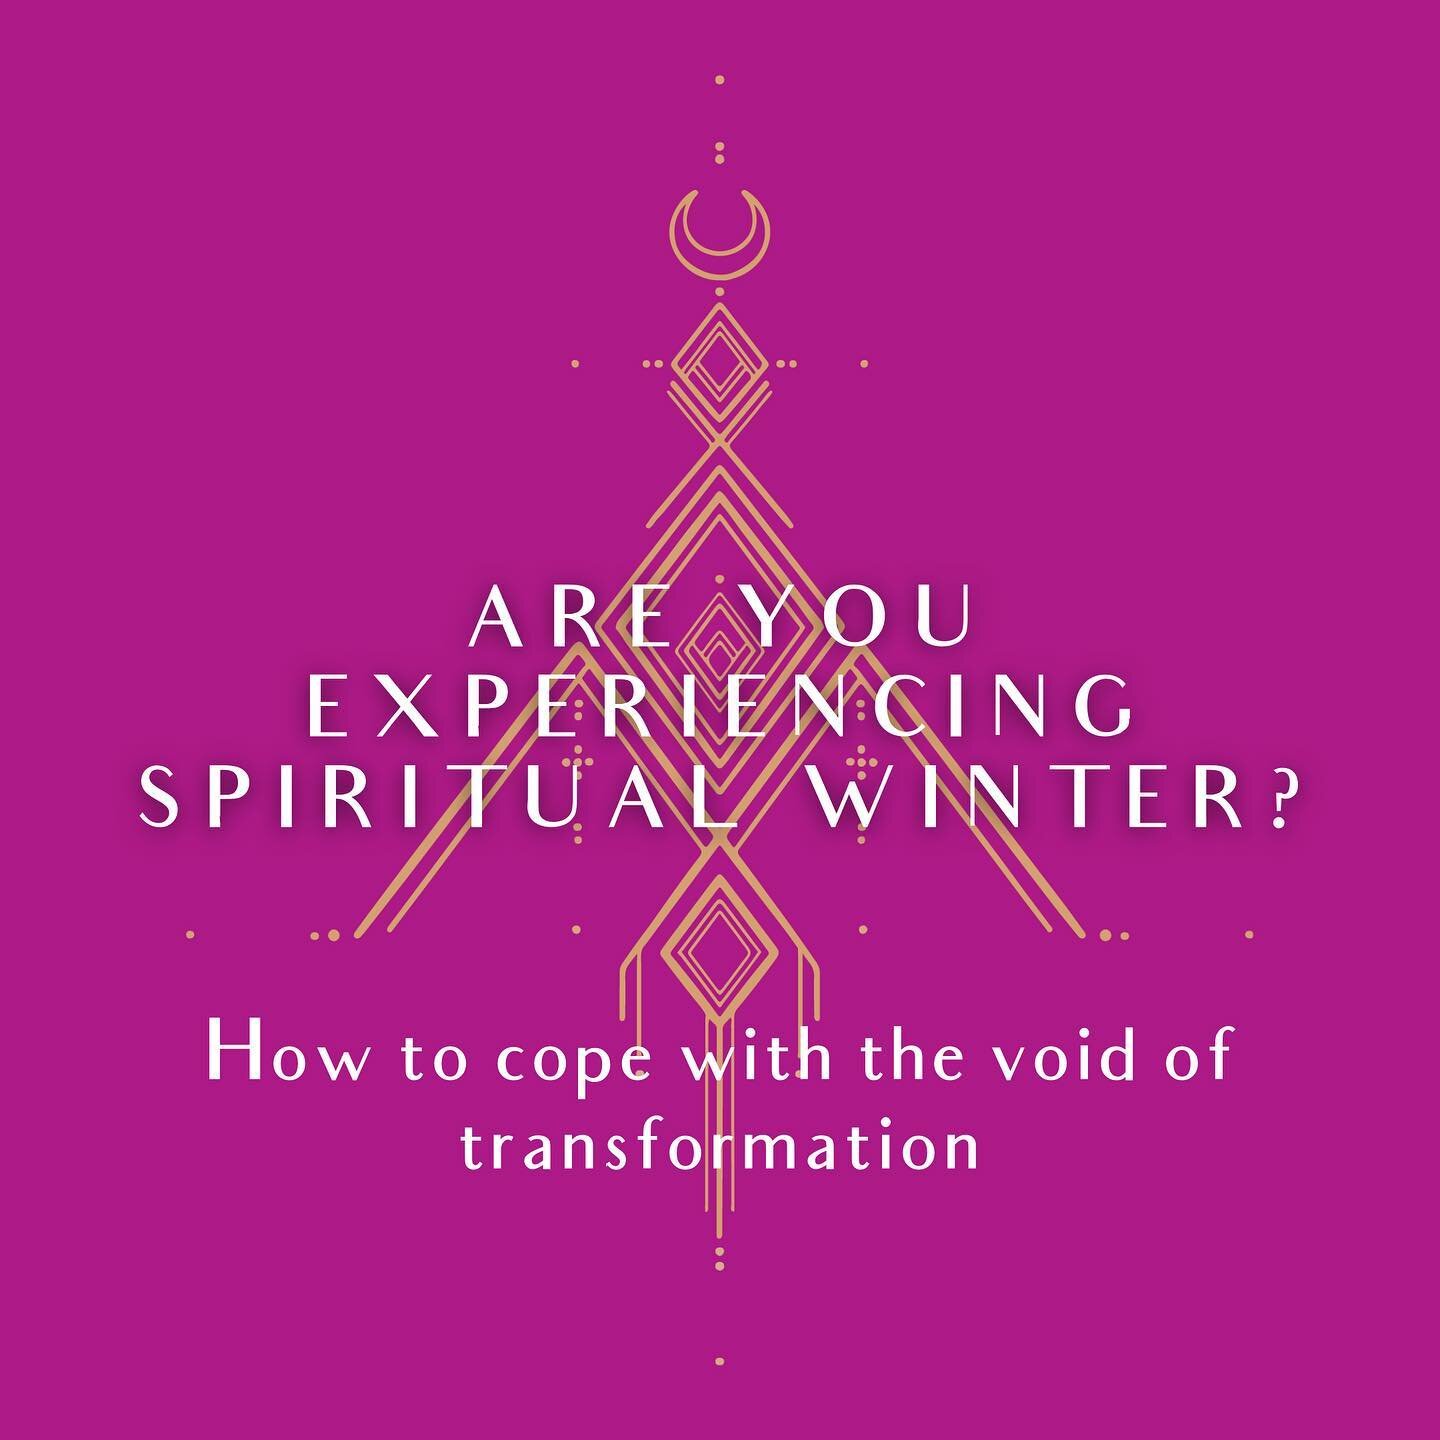 THE VOID OF TRANSFORMATION
(swipe to read)

There comes a time in your spiritual journey where it feels like not a lot is happening - in fact, it can feel like you are moving backwards in many ways. 
Things seem to be falling apart, structures in whi